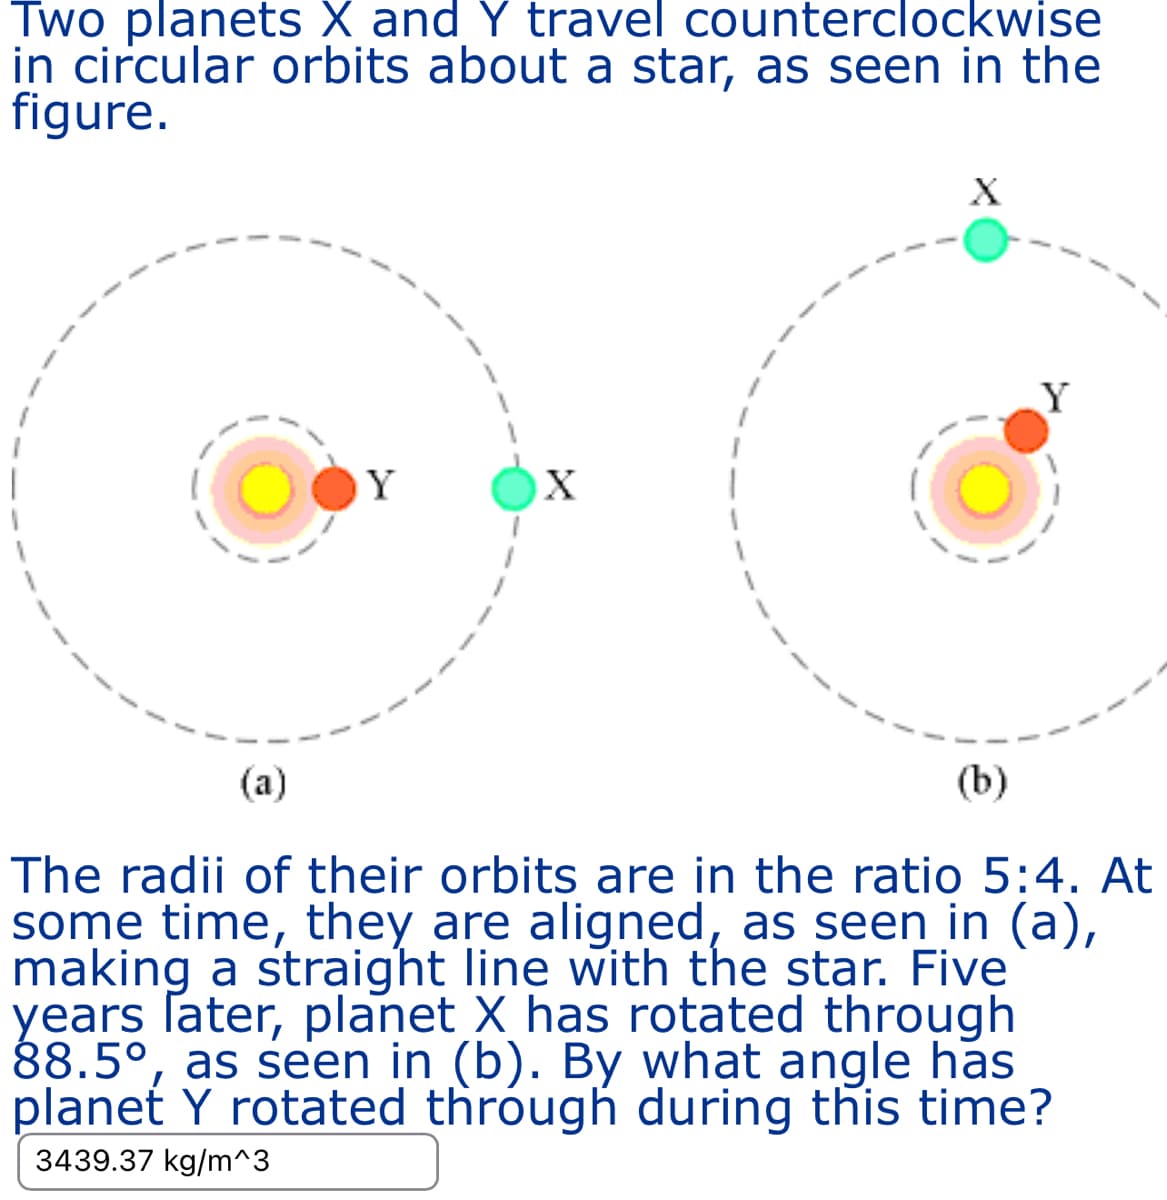 Two planets X and Y travel counterclockwise
in circular orbits about a star, as seen in the
figure.
Y
X
Y
(a)
(b)
The radii of their orbits are in the ratio 5:4. At
some time, they are aligned, as seen in (a),
making a straight line with the star. Five
years later, planet X has rotated through
88.5°, as seen in (b). By what angle has
planet Y rotated through during this time?
3439.37 kg/m^3